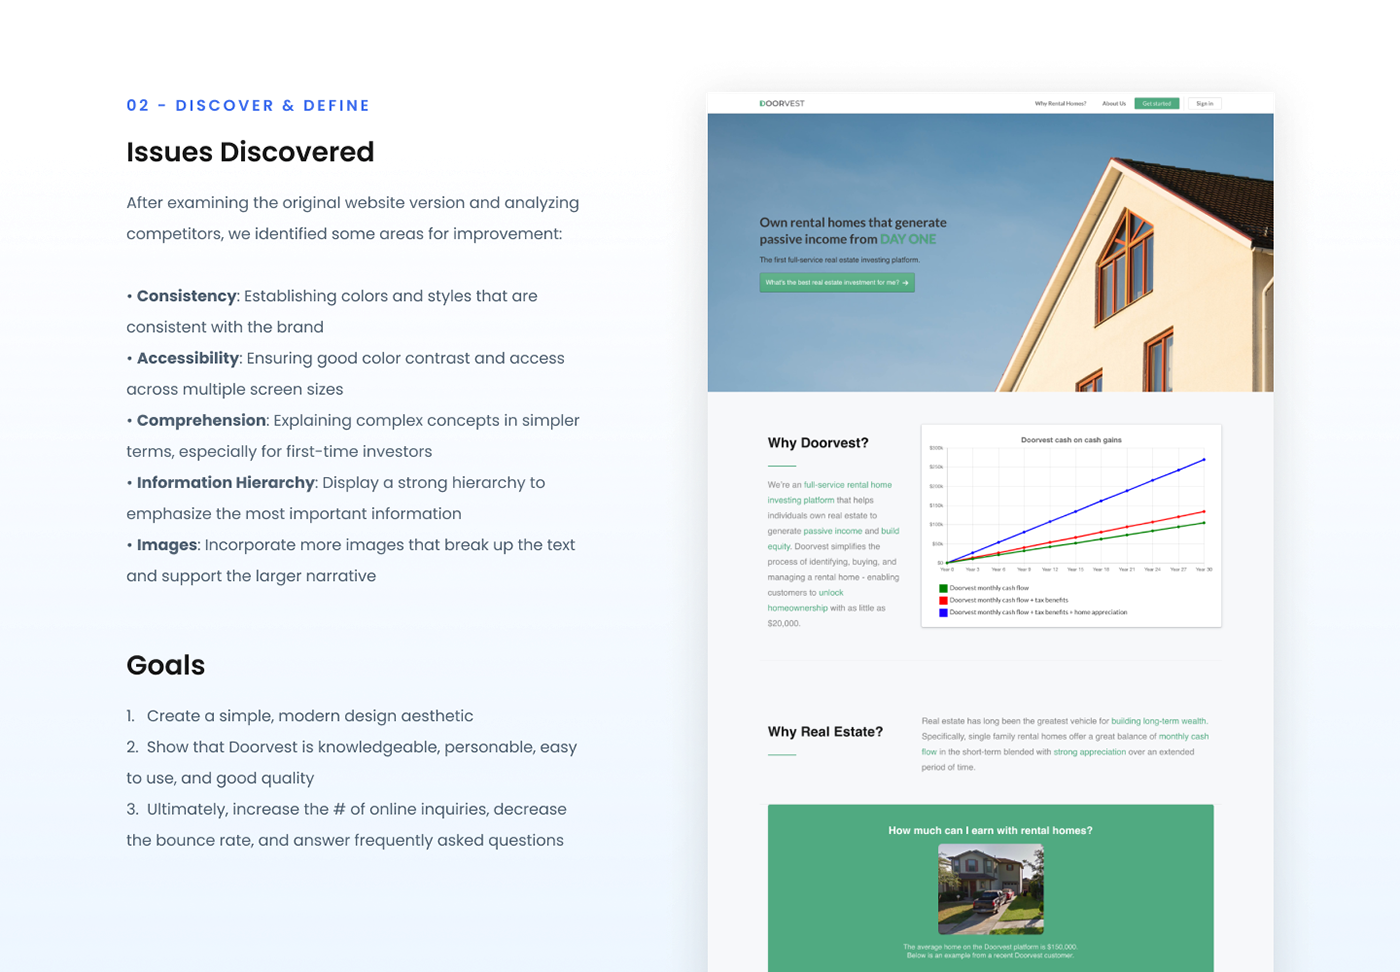 Screenshot of original landing page with areas for improvement and project goals